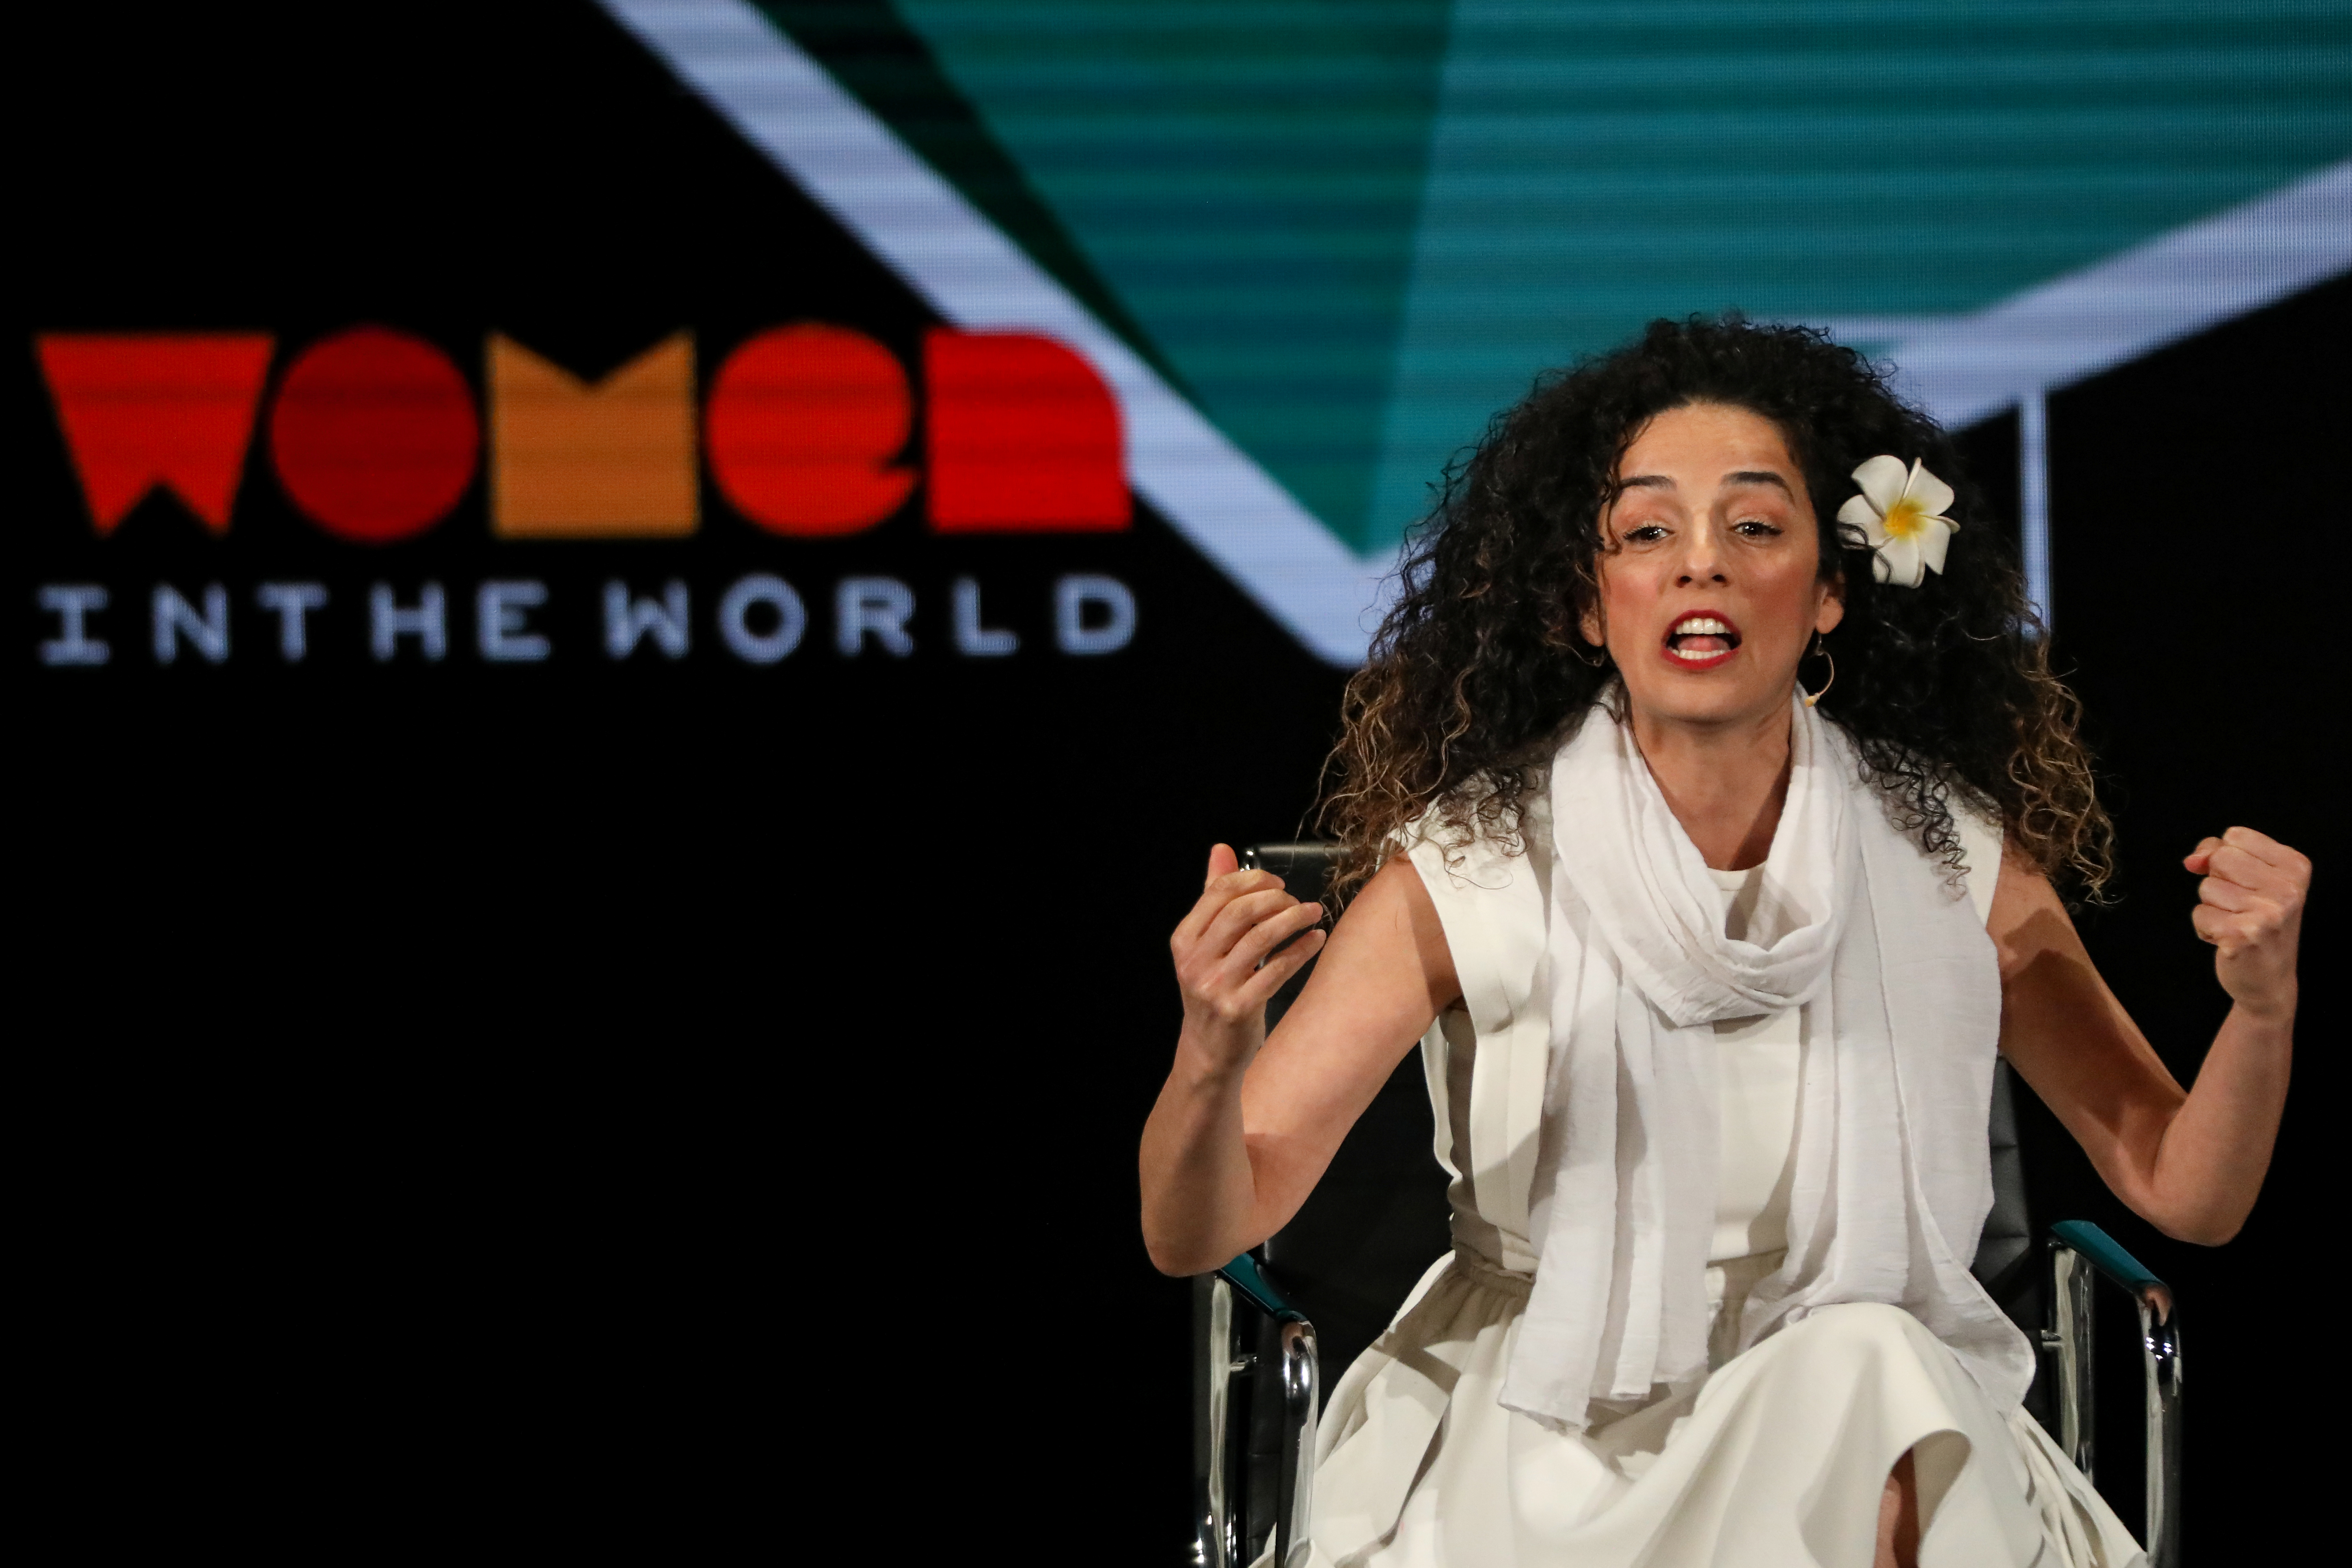 Masih Alinejad, Iranian journalist and women's rights activist, speaks on stage at the Women In The World Summit in New York